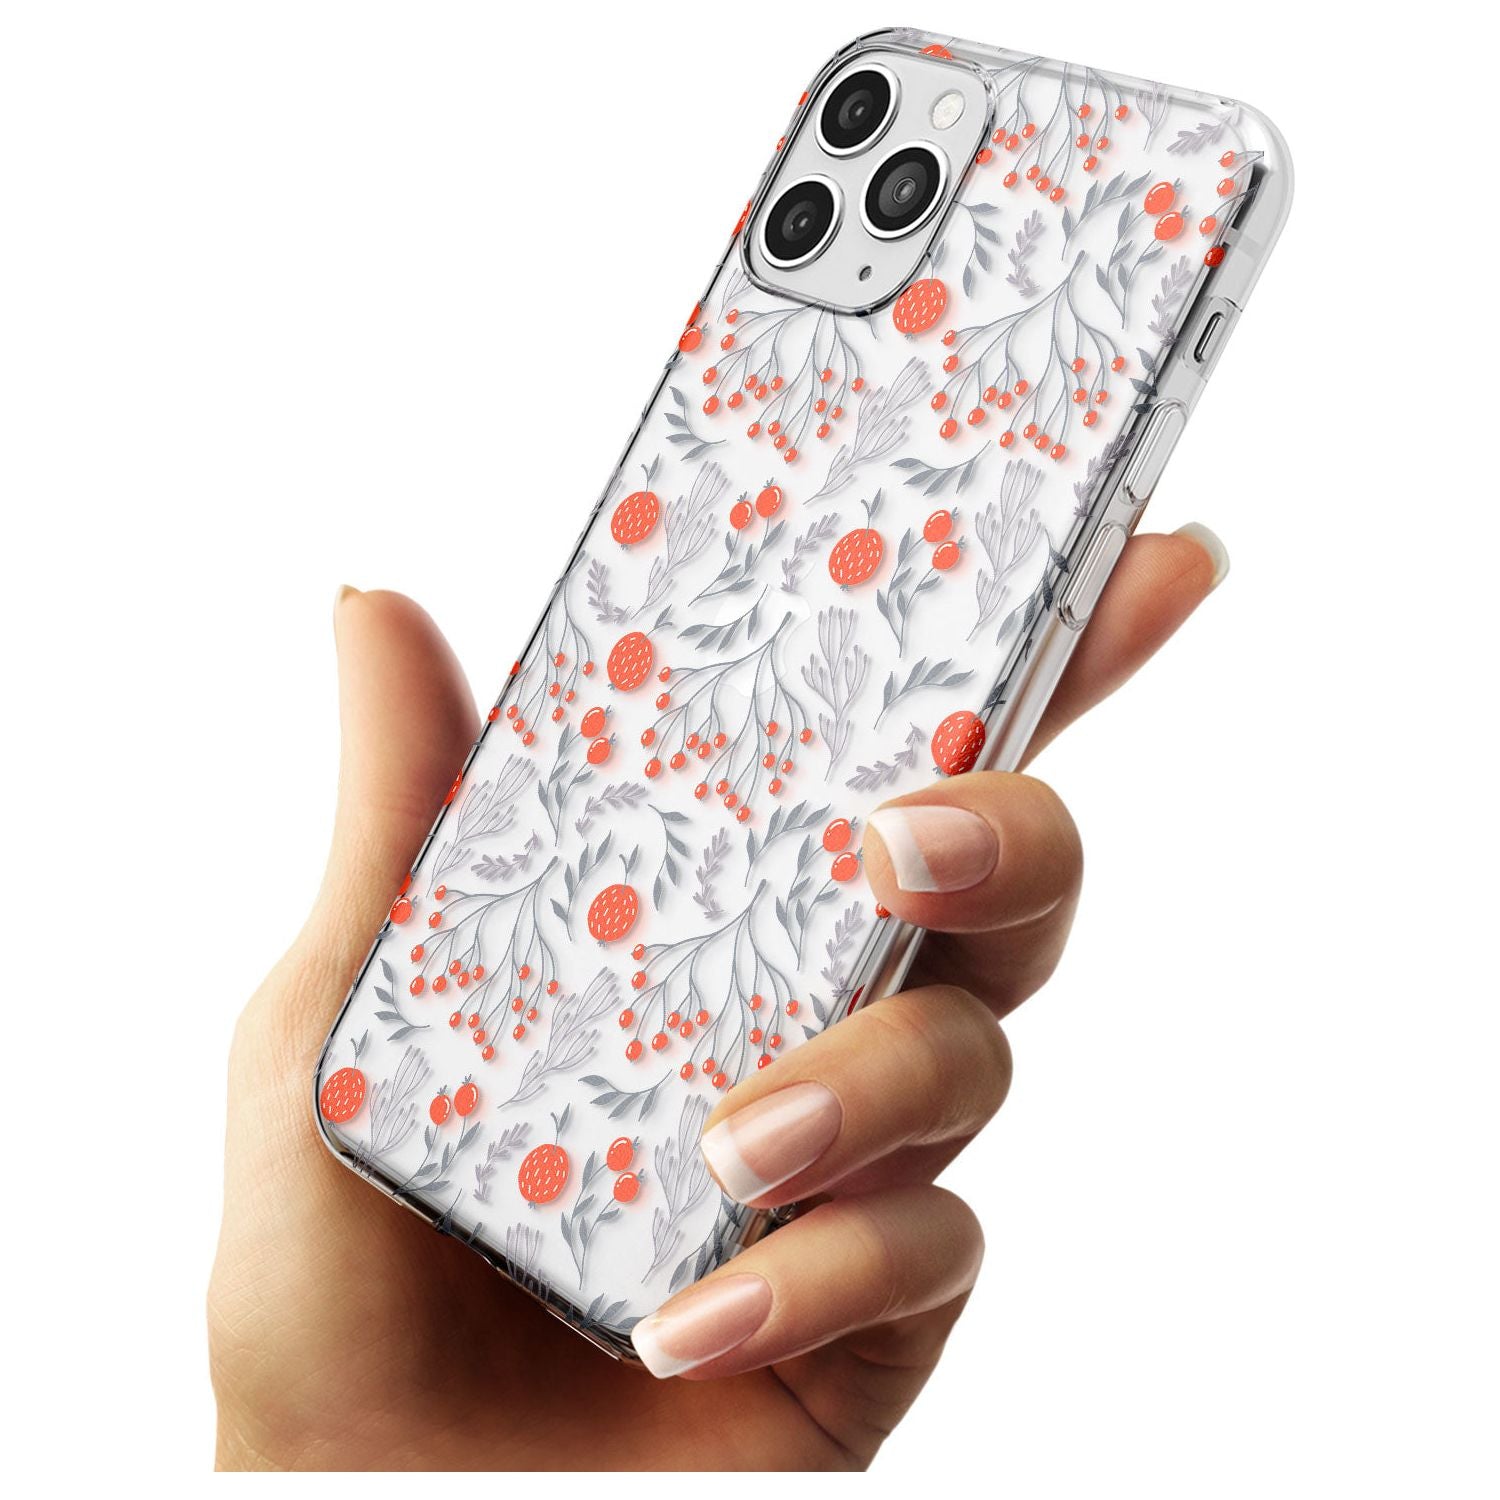 Red Fruits Transparent Floral Slim TPU Phone Case for iPhone 11 Pro Max